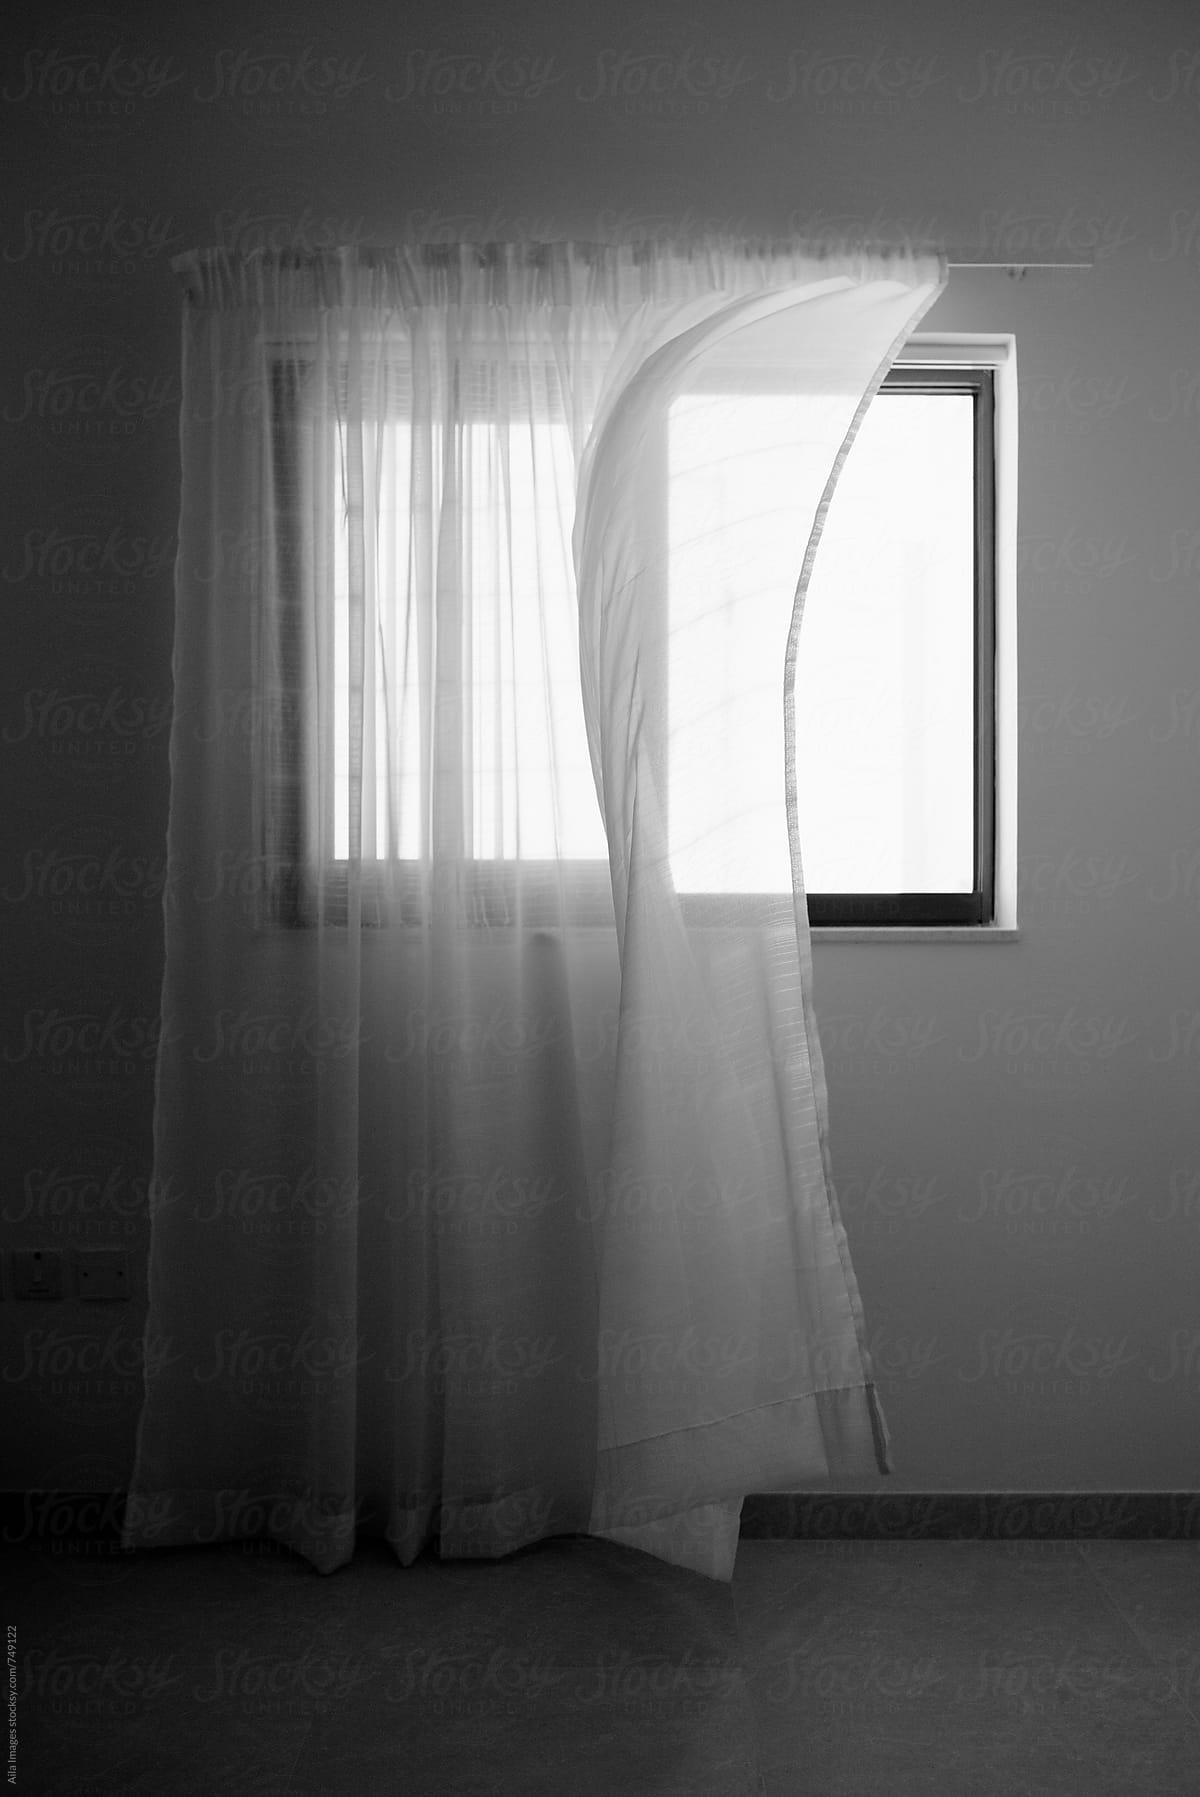 Curtain blowing in black and white